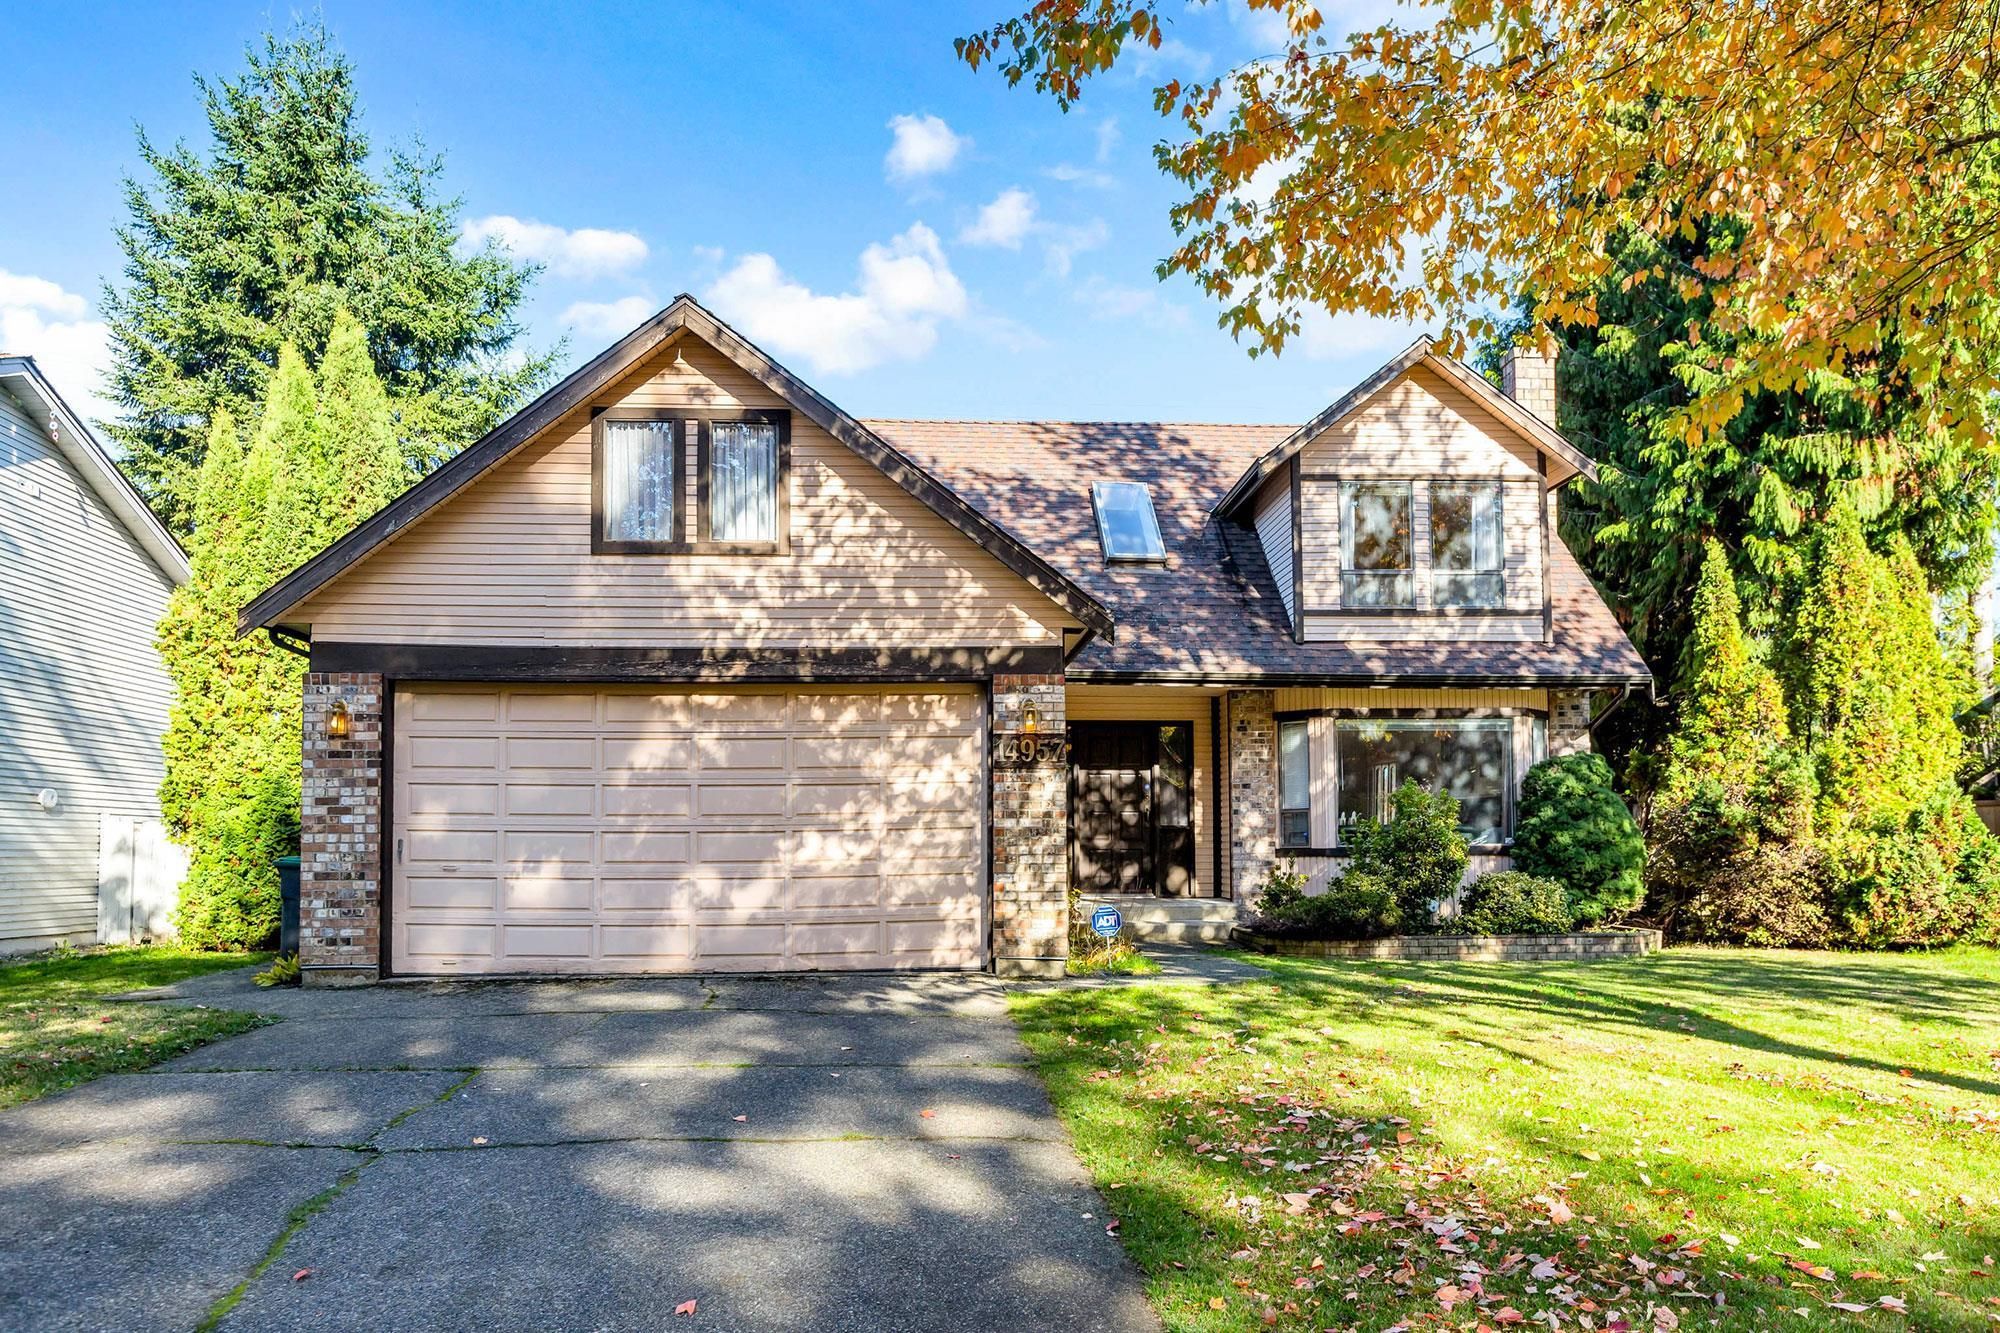 We have sold a property at 14957 95 AVE in Surrey